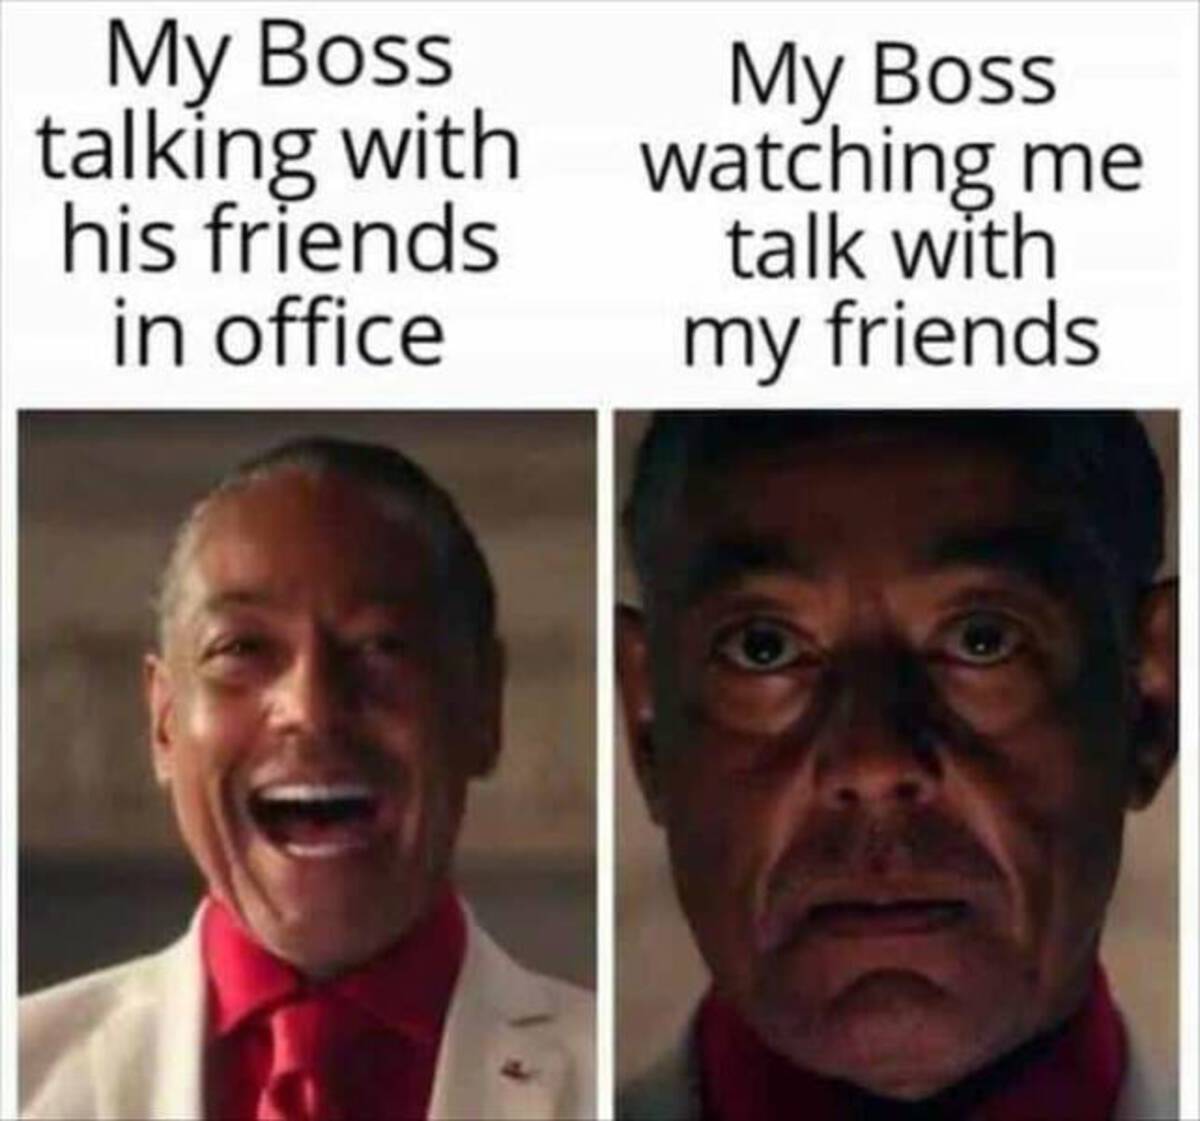 double standard meme - My Boss talking with his friends in office My Boss watching me talk with my friends